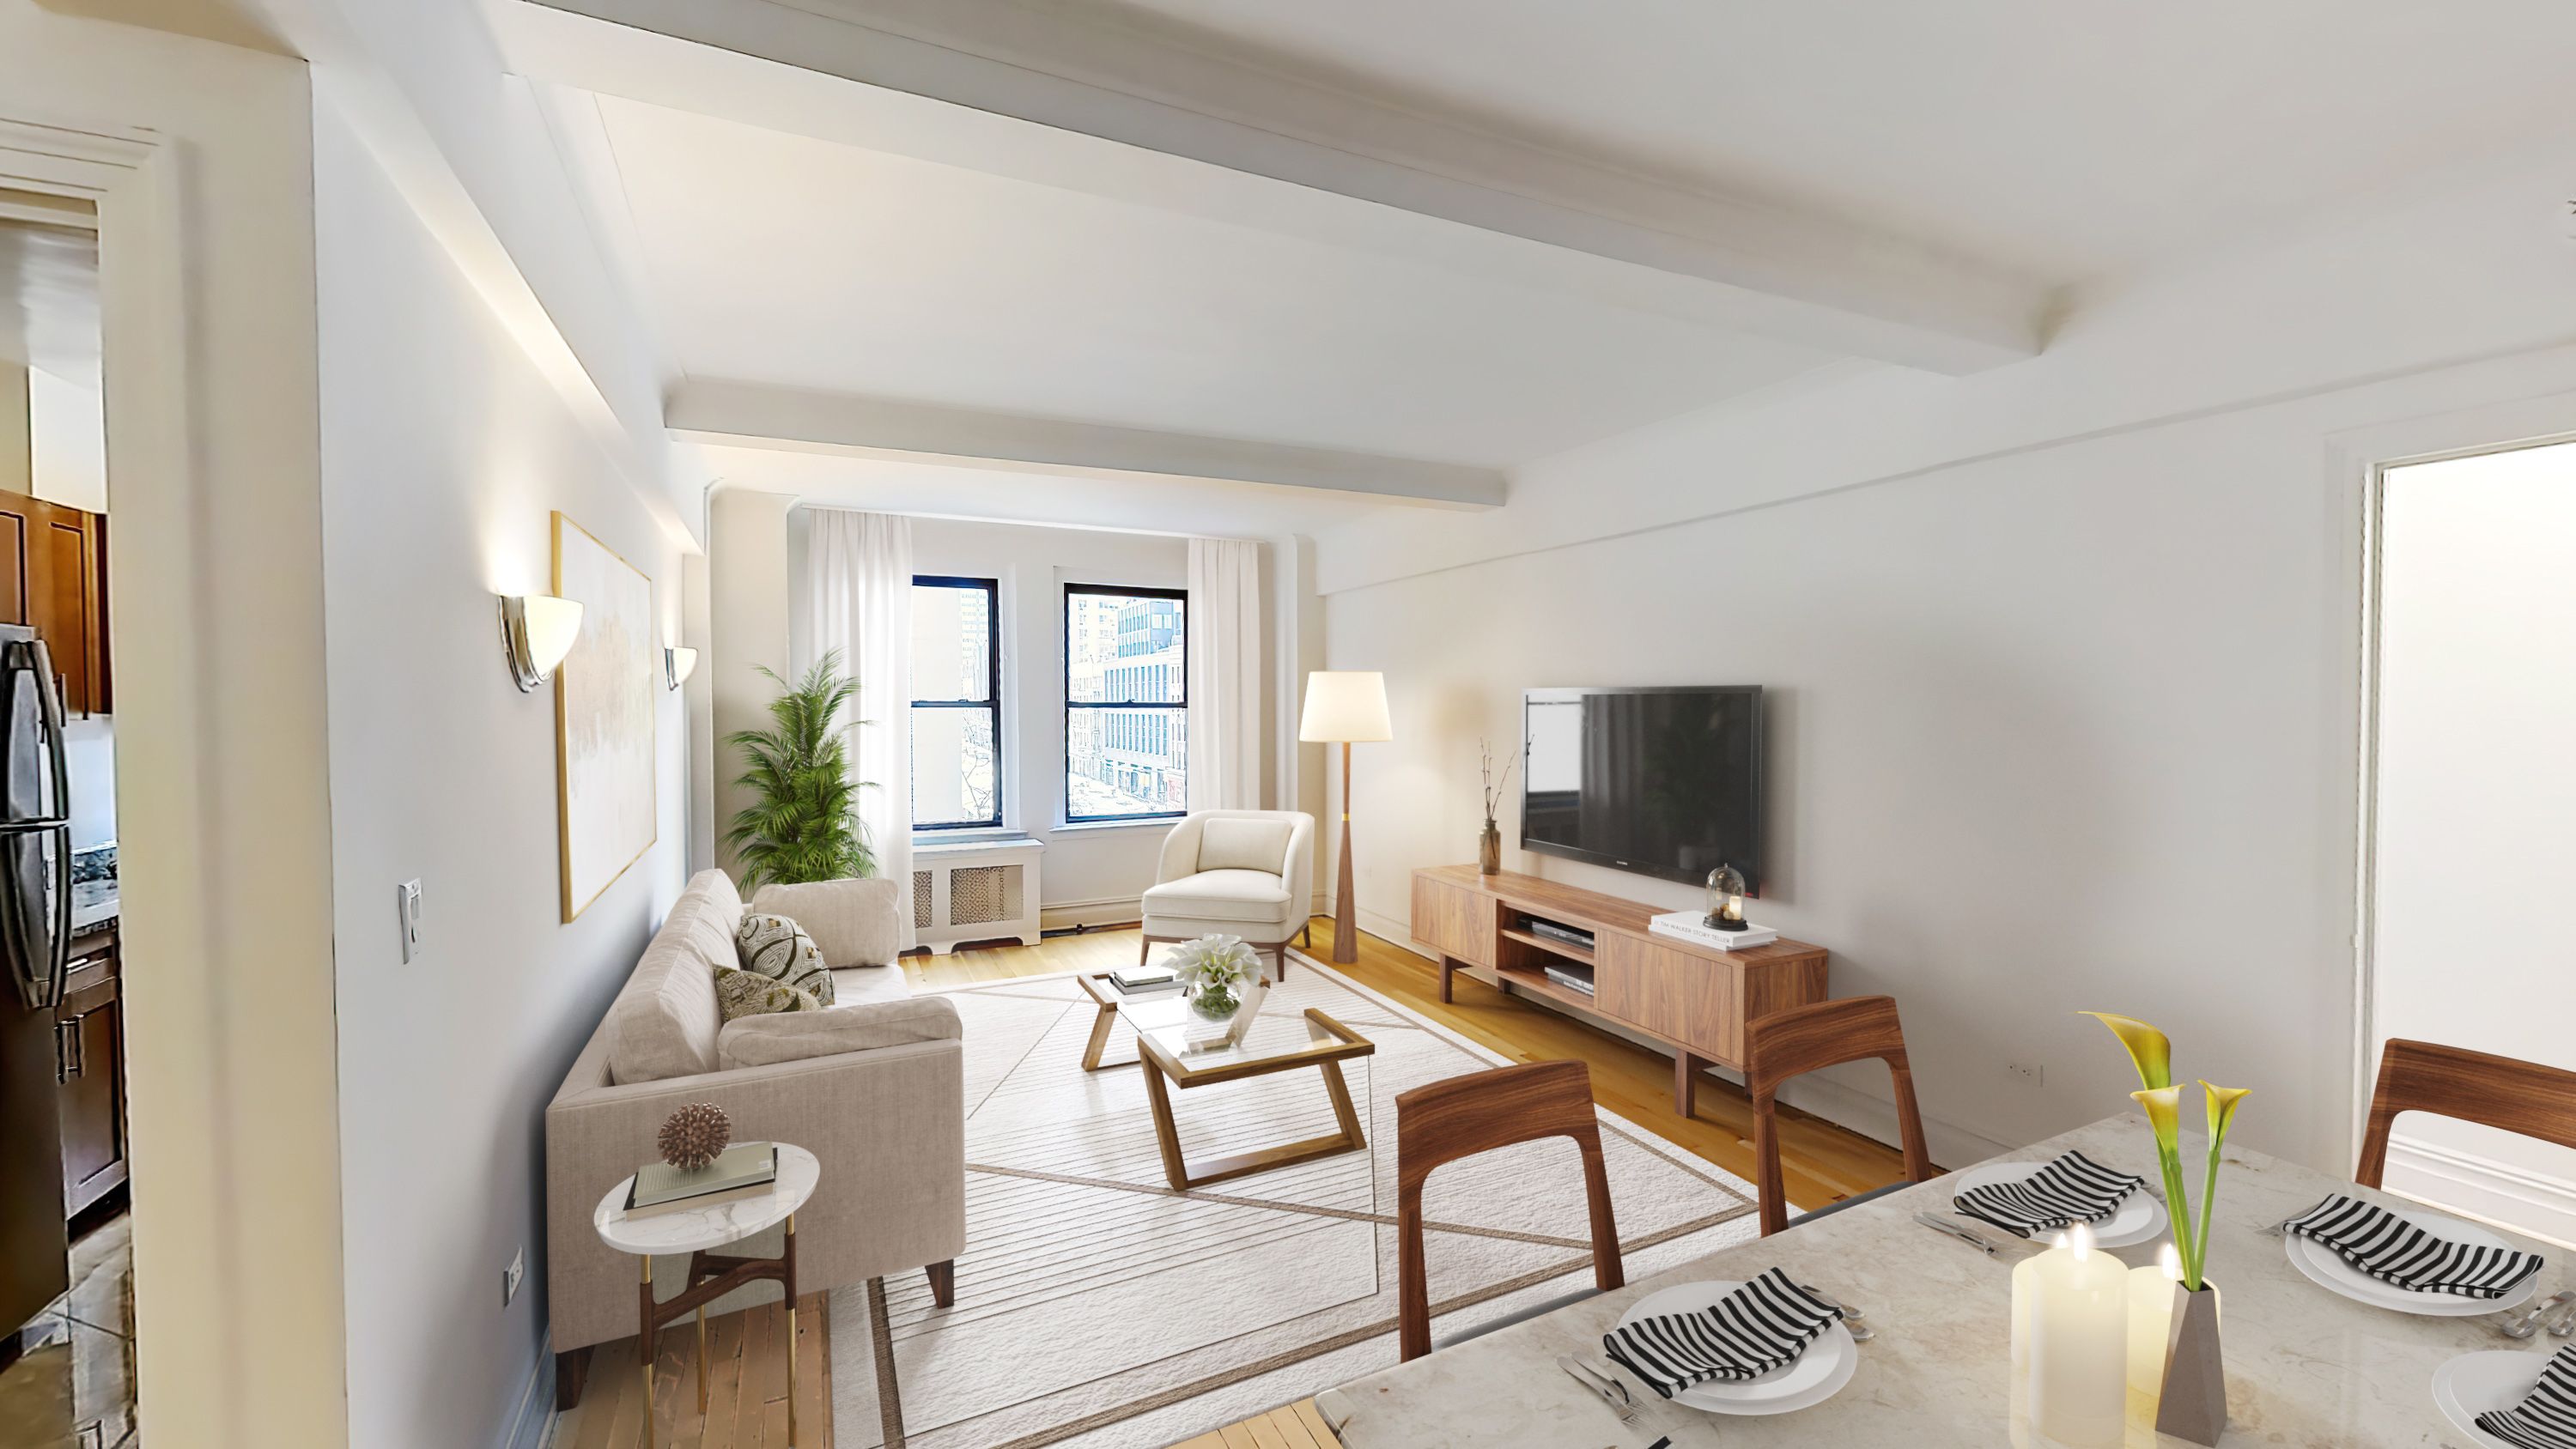 405 East 54th Street 16-B, Sutton Place, Midtown East, NYC - 1 Bedrooms  
1 Bathrooms  
3 Rooms - 